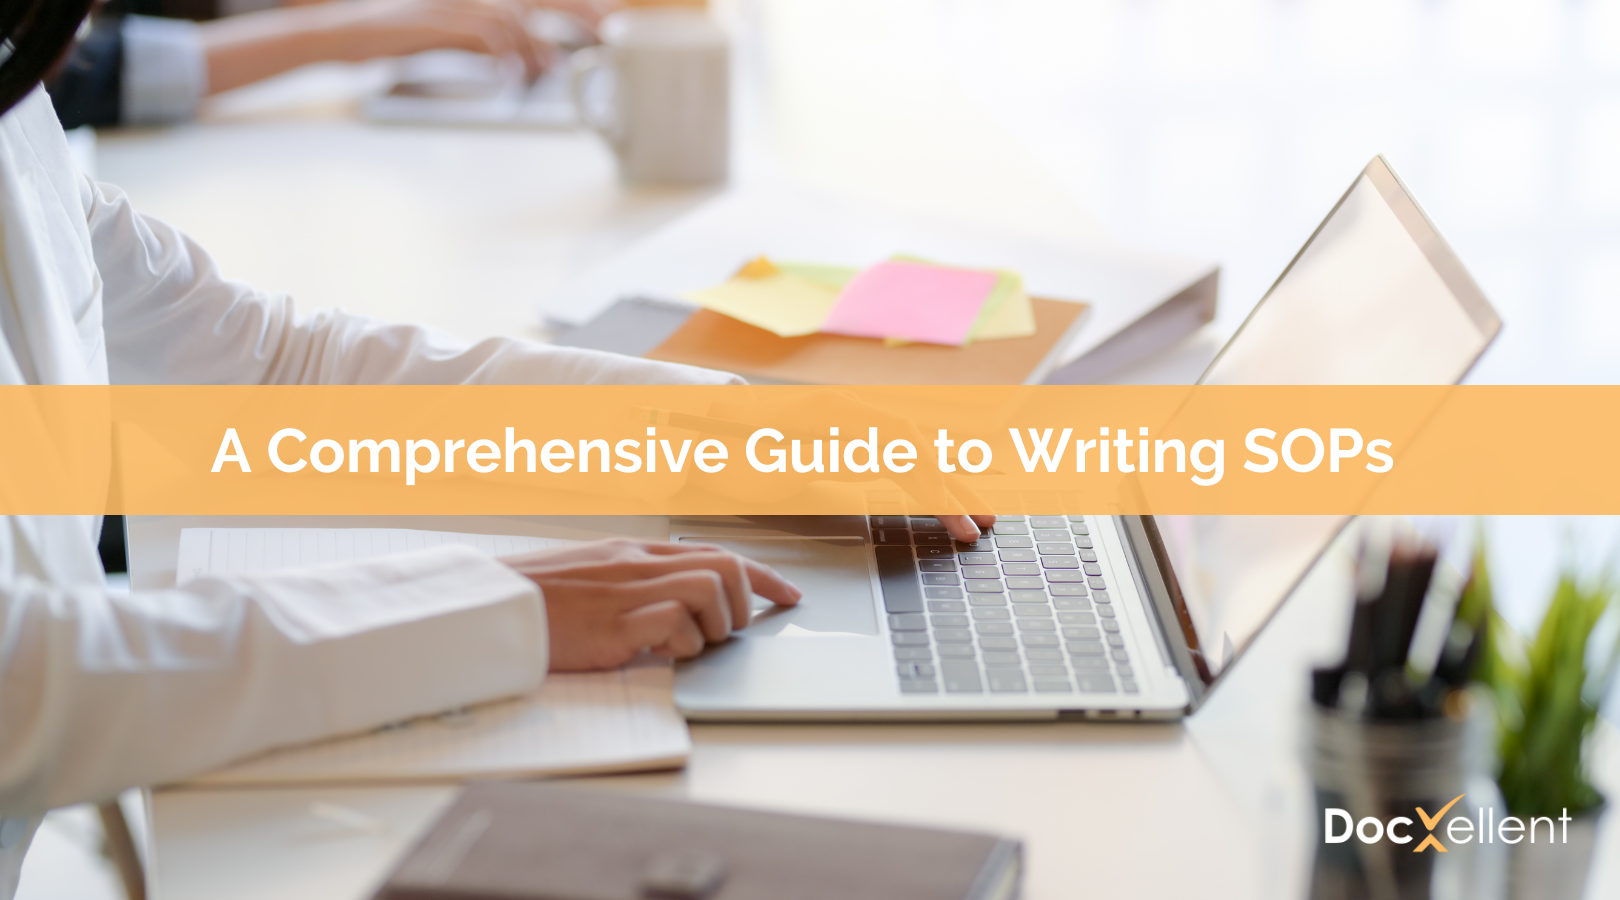 A Comprehensive Guide to Writing SOPs